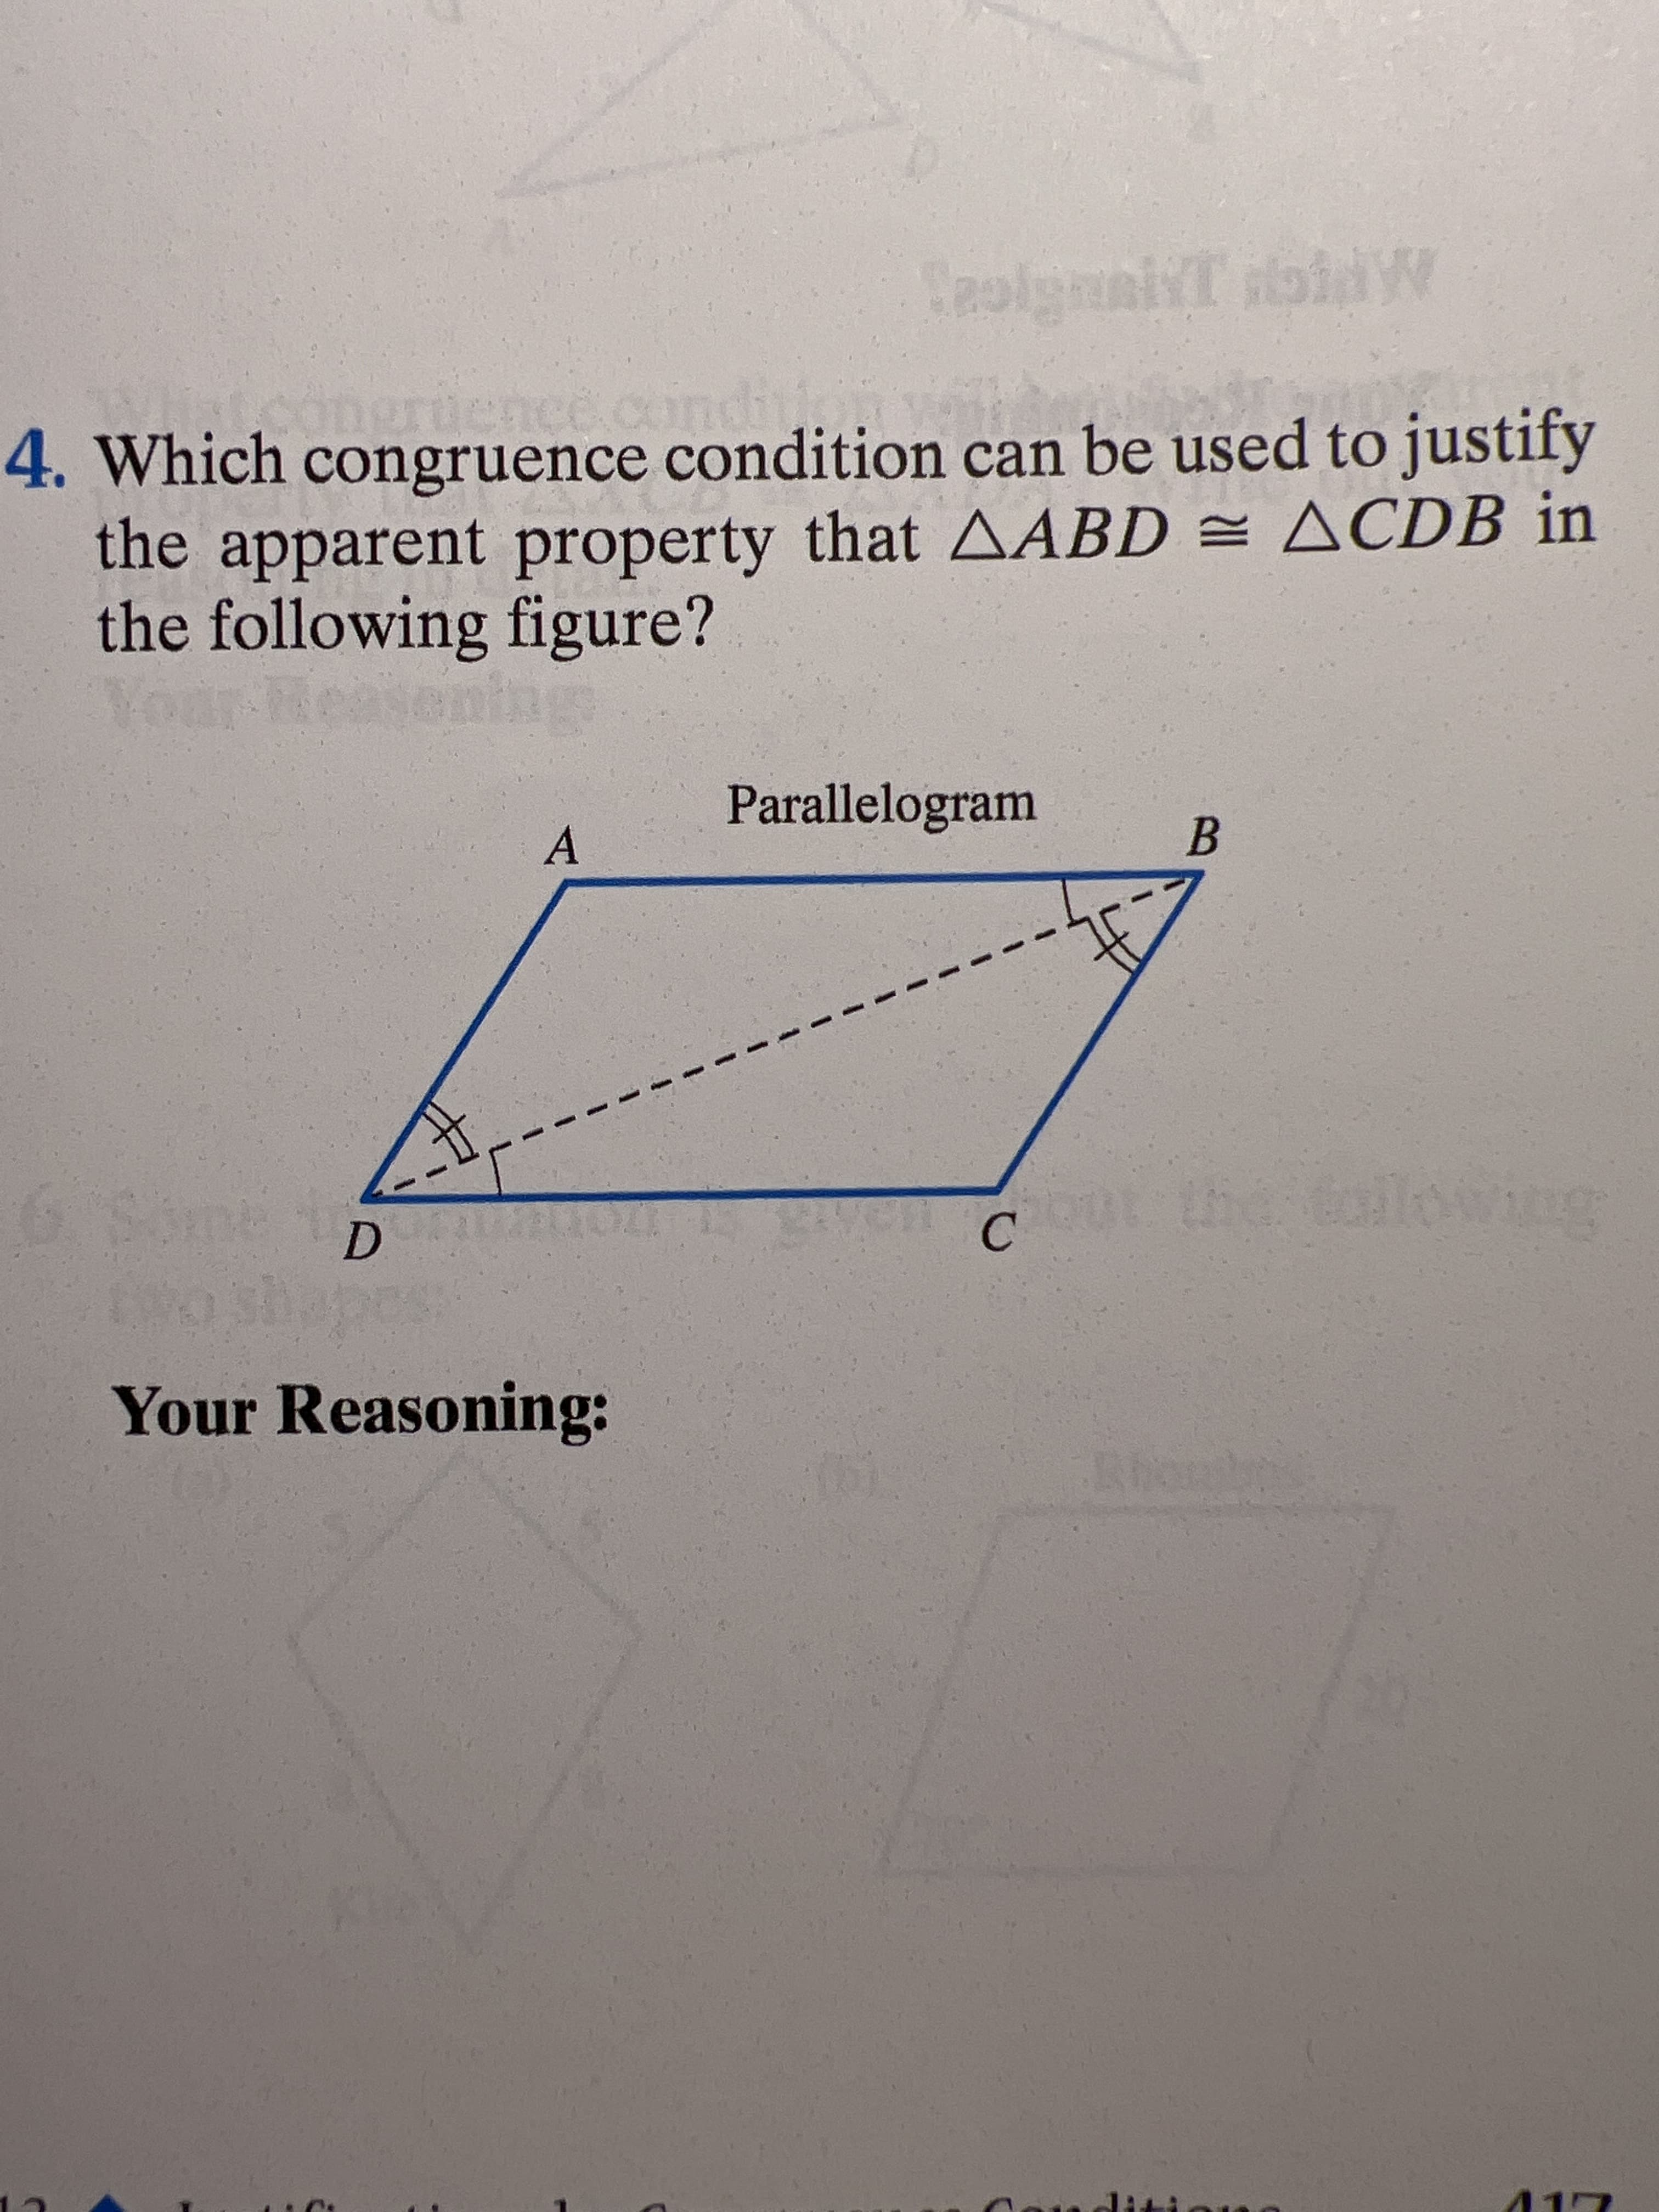 A.
Congrucnce.cond
4. Which congruence condition can be used to justify
the apparent property that AABD = ACDB in
the following figure?
ening
Parallelogram
B.
D.
C.
Your Reasoning:
